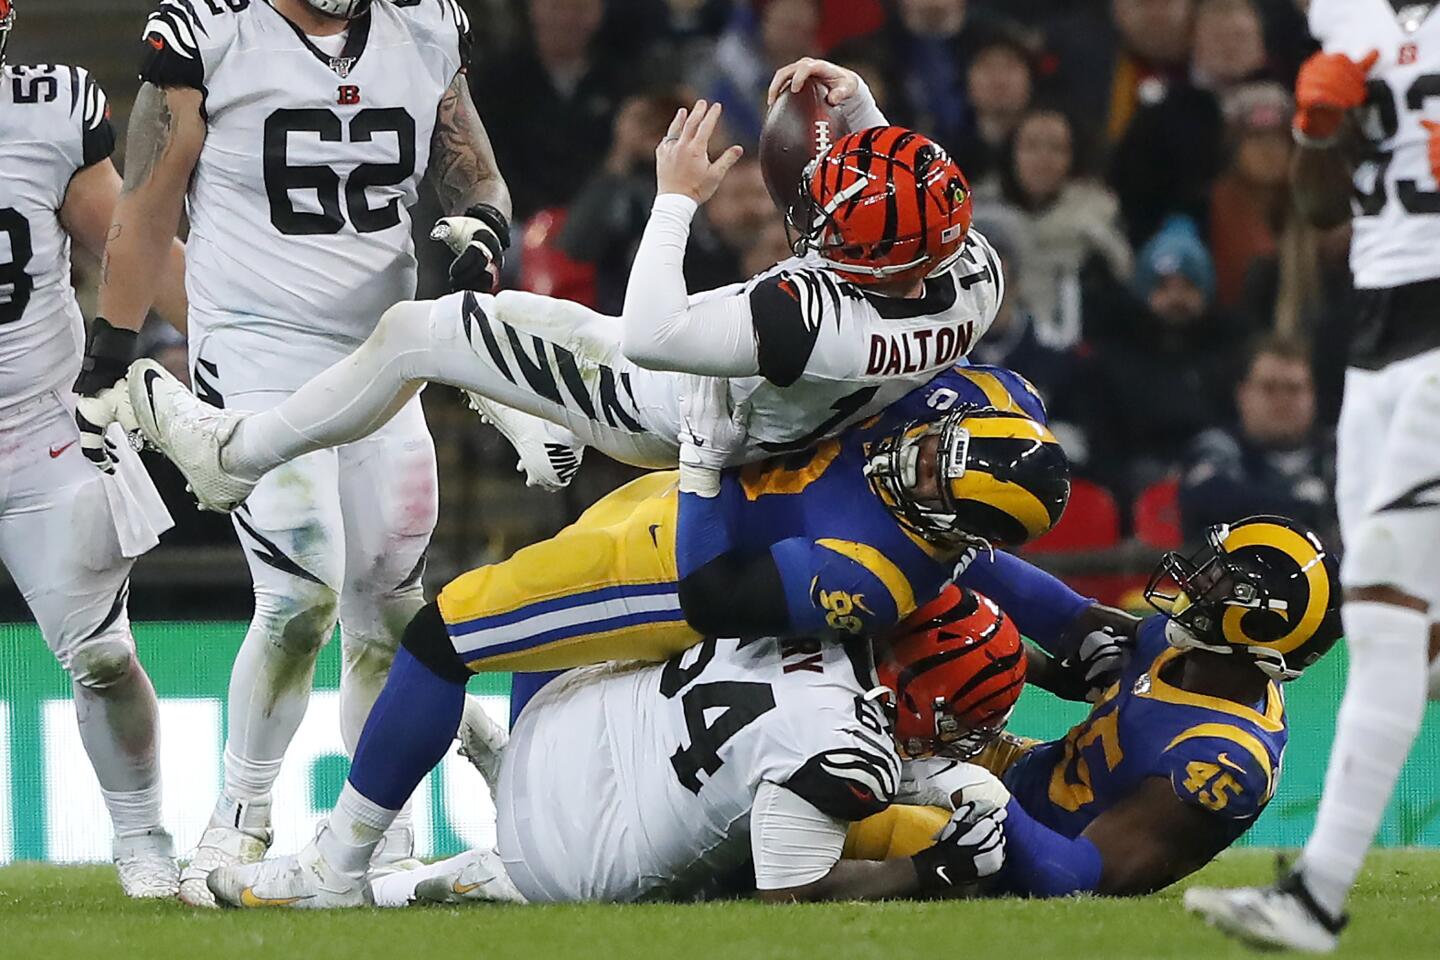 Bengals quarterback Andy Dalton is sacked by Rams defensive tackle Aaron Donald during the second half.